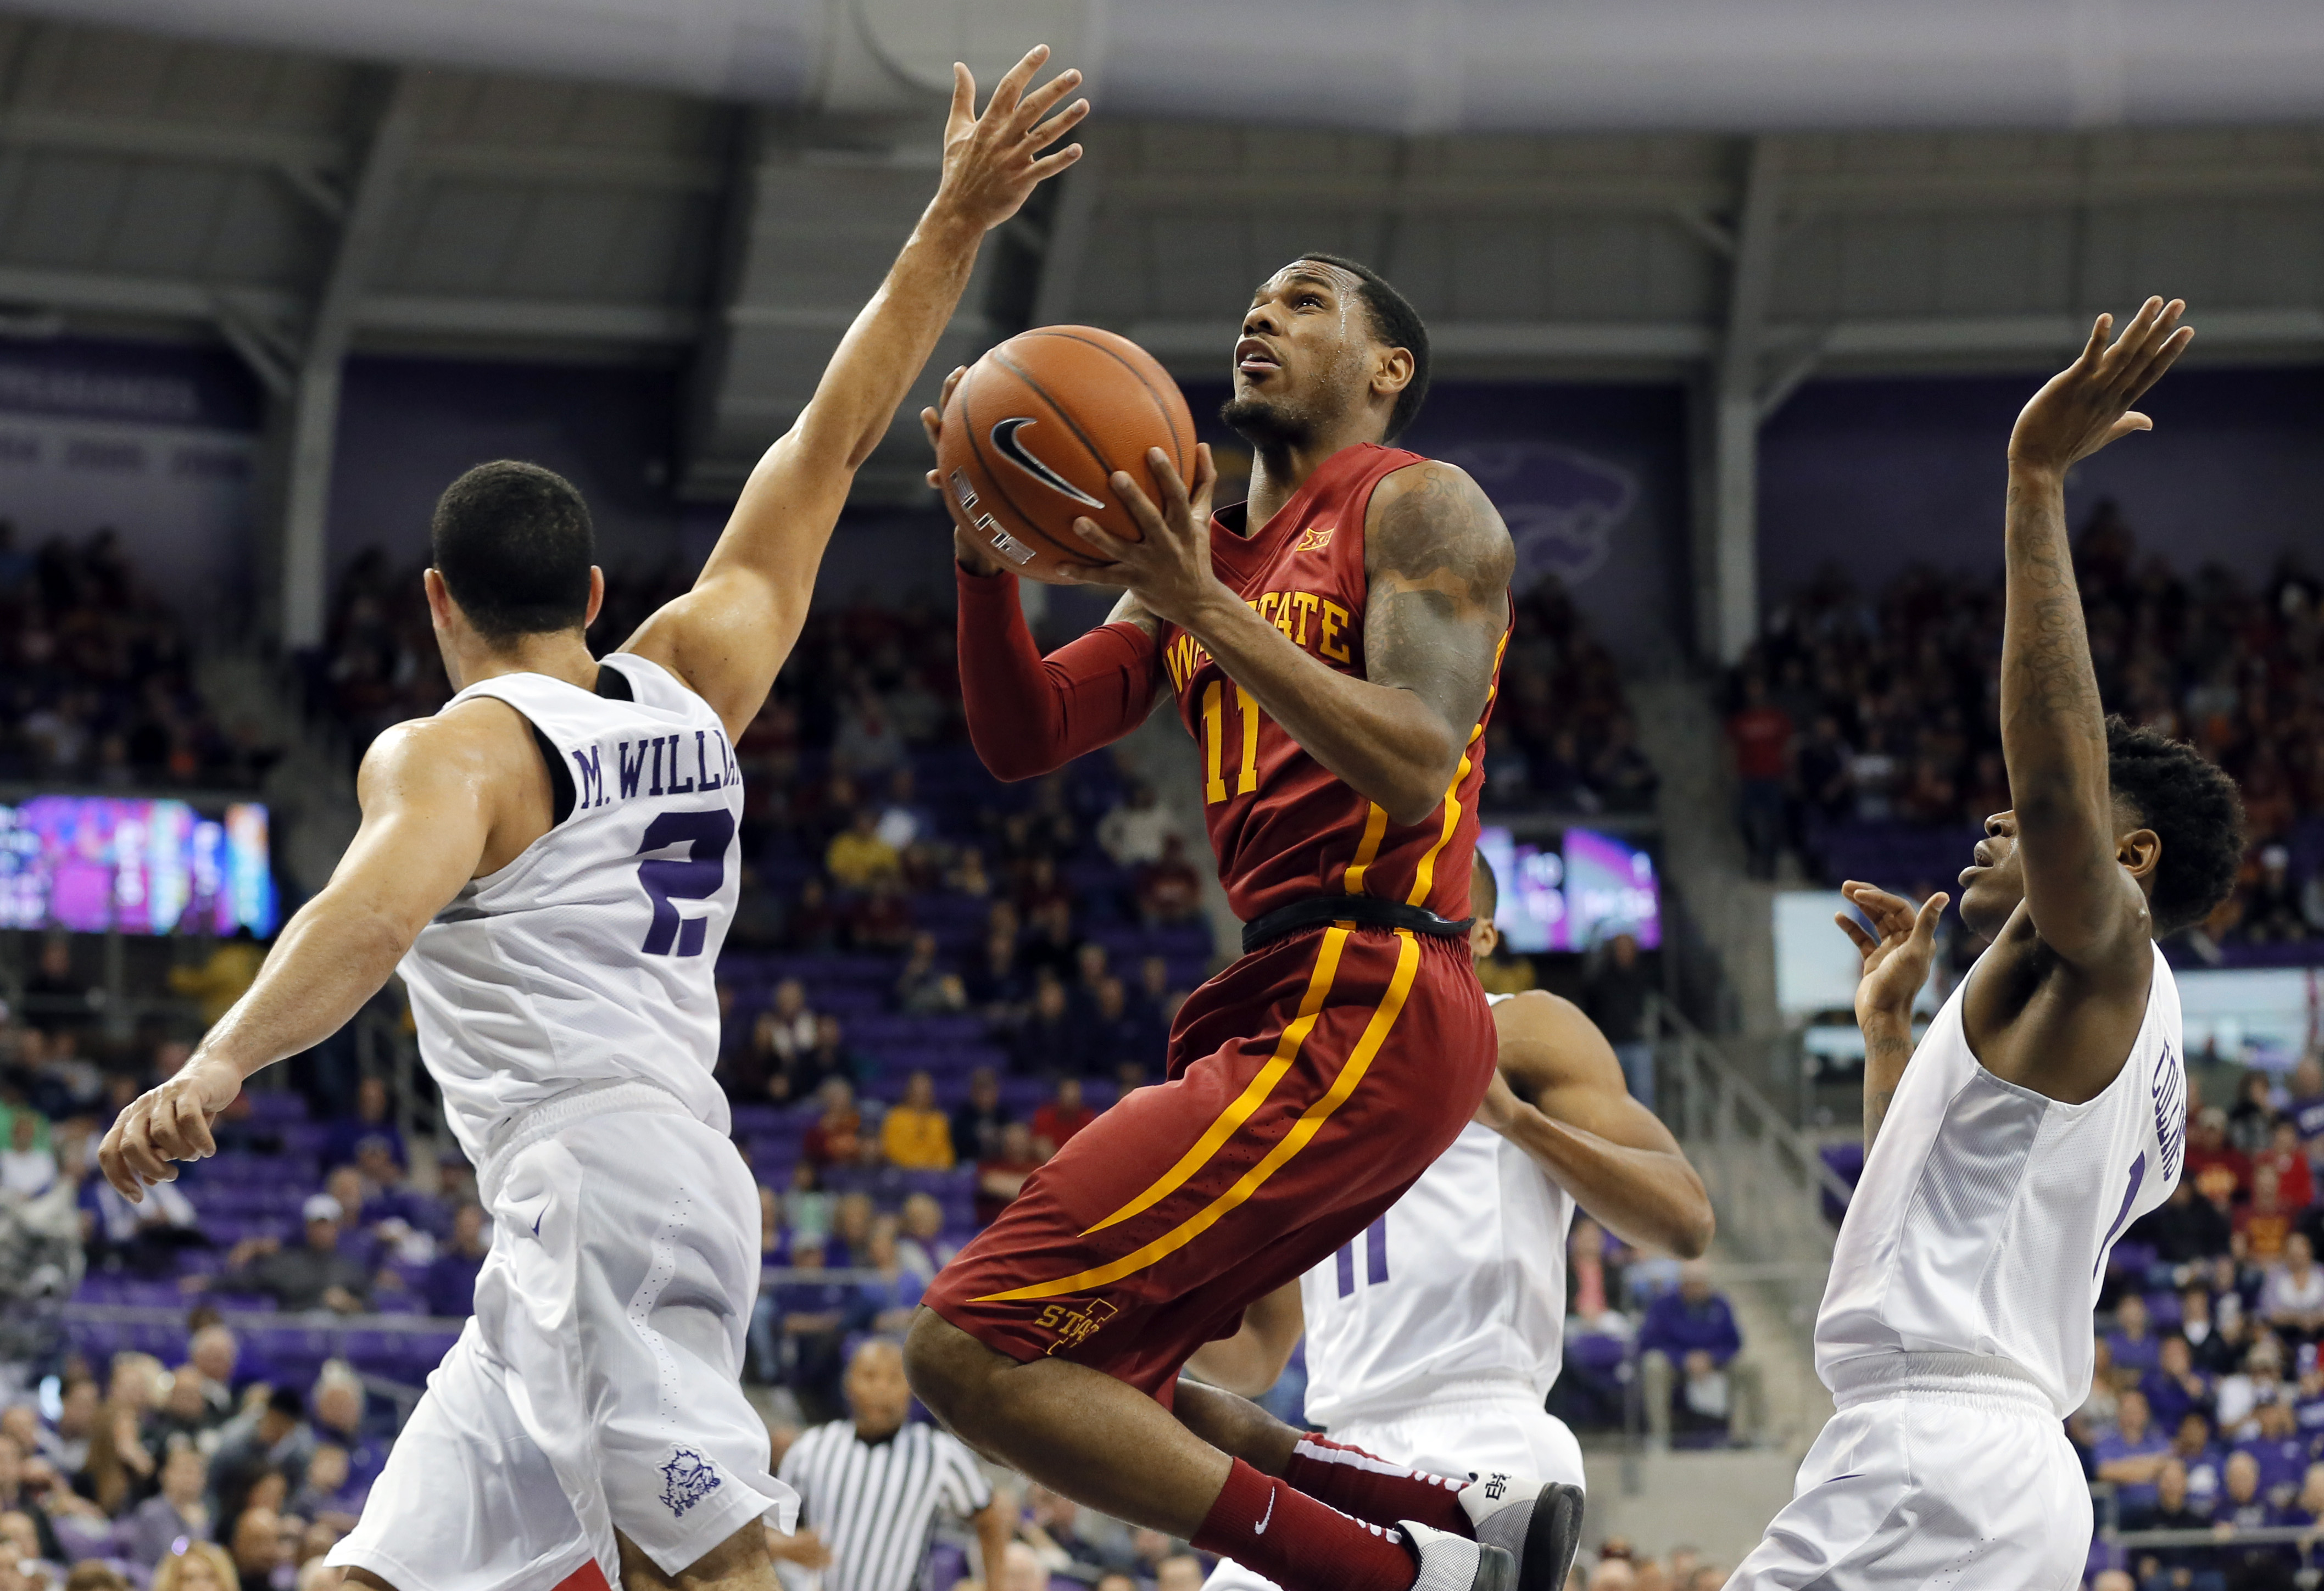 TCU guard Michael Williams (2) defends as Iowa State guard Monte Morris (11) leaps to the basket for a shot in the first half of an NCAA college basketball game, Saturday, Jan. 23, 2016, in Fort Worth, Texas. Morris had 18 points and six assists and No. 19 Iowa State followed a win over top-ranked Oklahoma with a 73-60 victory over TCU on Saturday. (AP Photo/Tony Gutierrez)